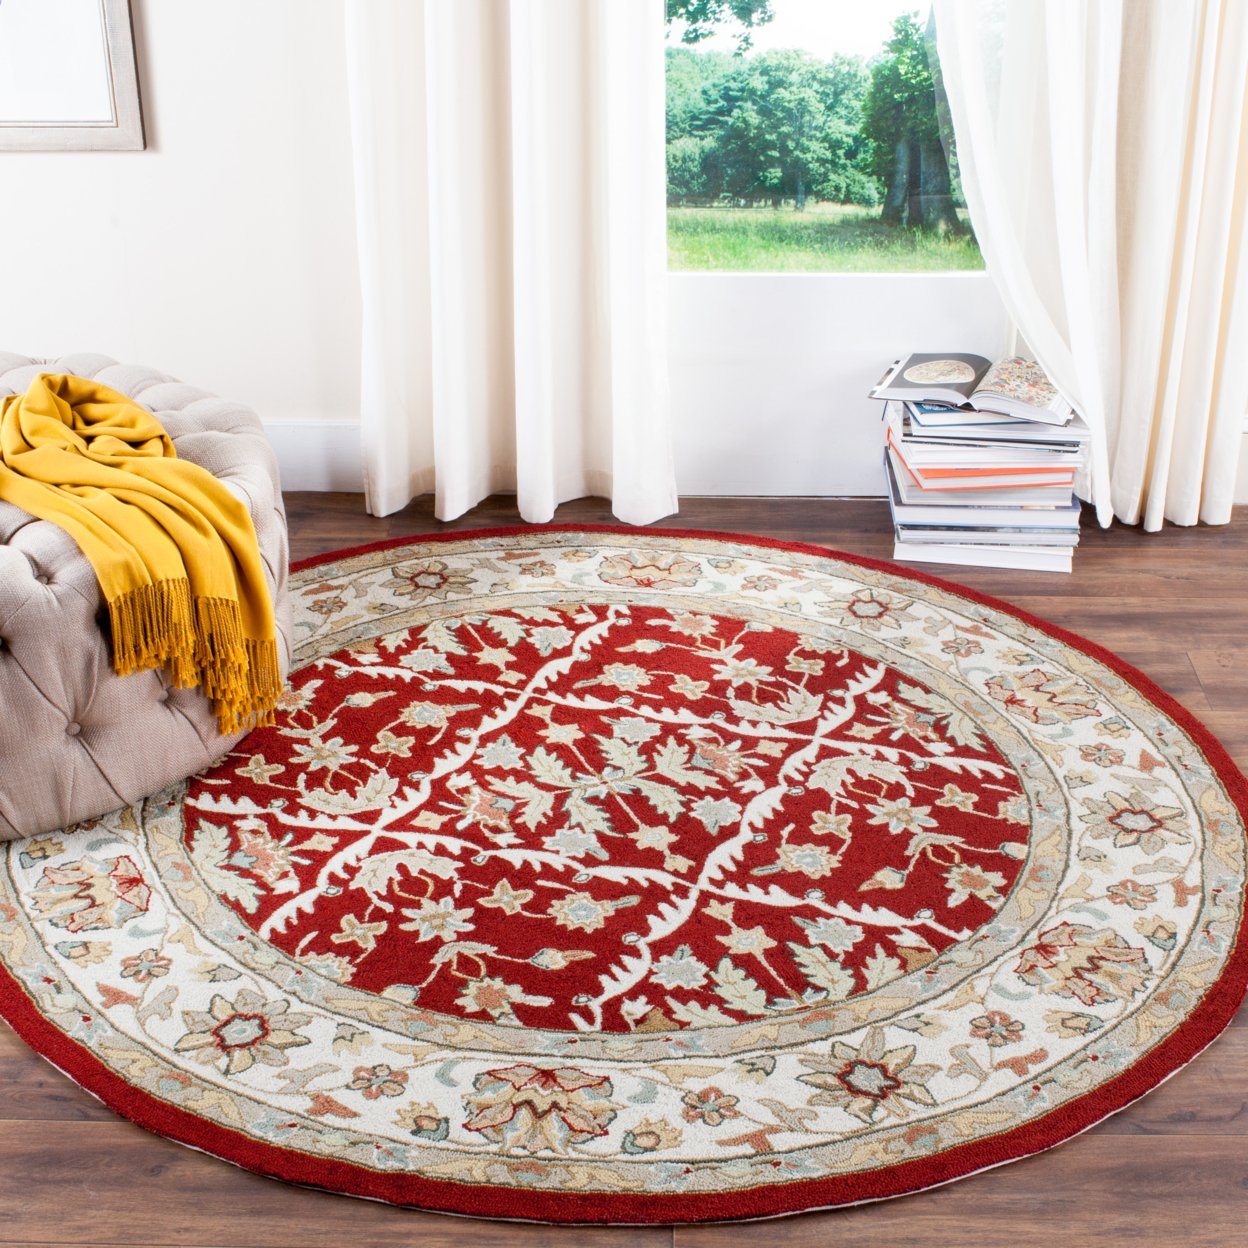 SAFAVIEH Easy Care EZC717A Red / Ivory Rug - 6' Round